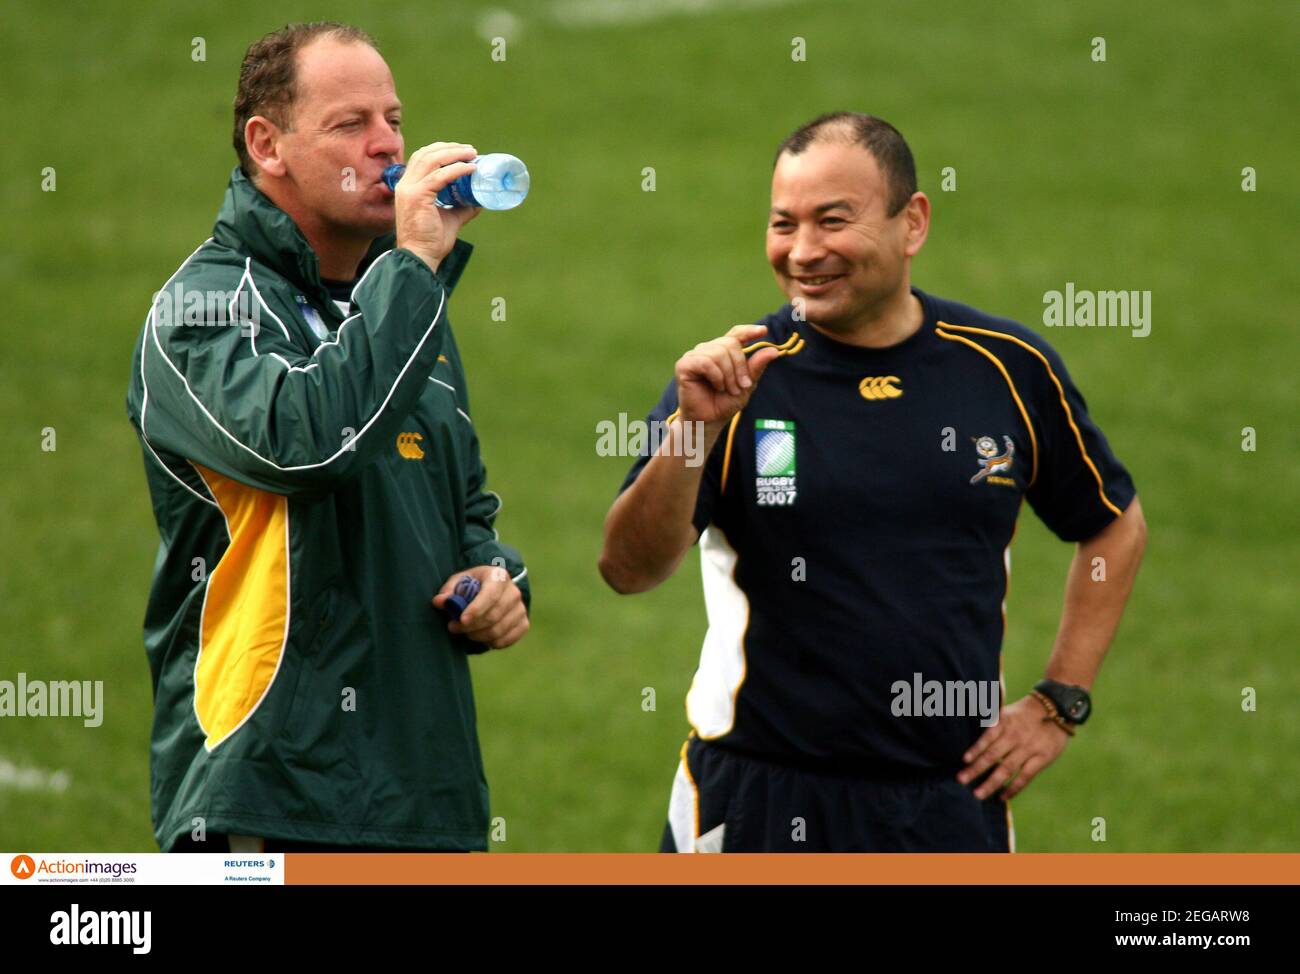 Rugby Union - South Africa Training - Stade Jean Bouin, Marseille, France -  3/10/07 South Africa head coach Jake White (L) with assistant Eddie Jones  (R) during training Mandatory Credit: Action Images /